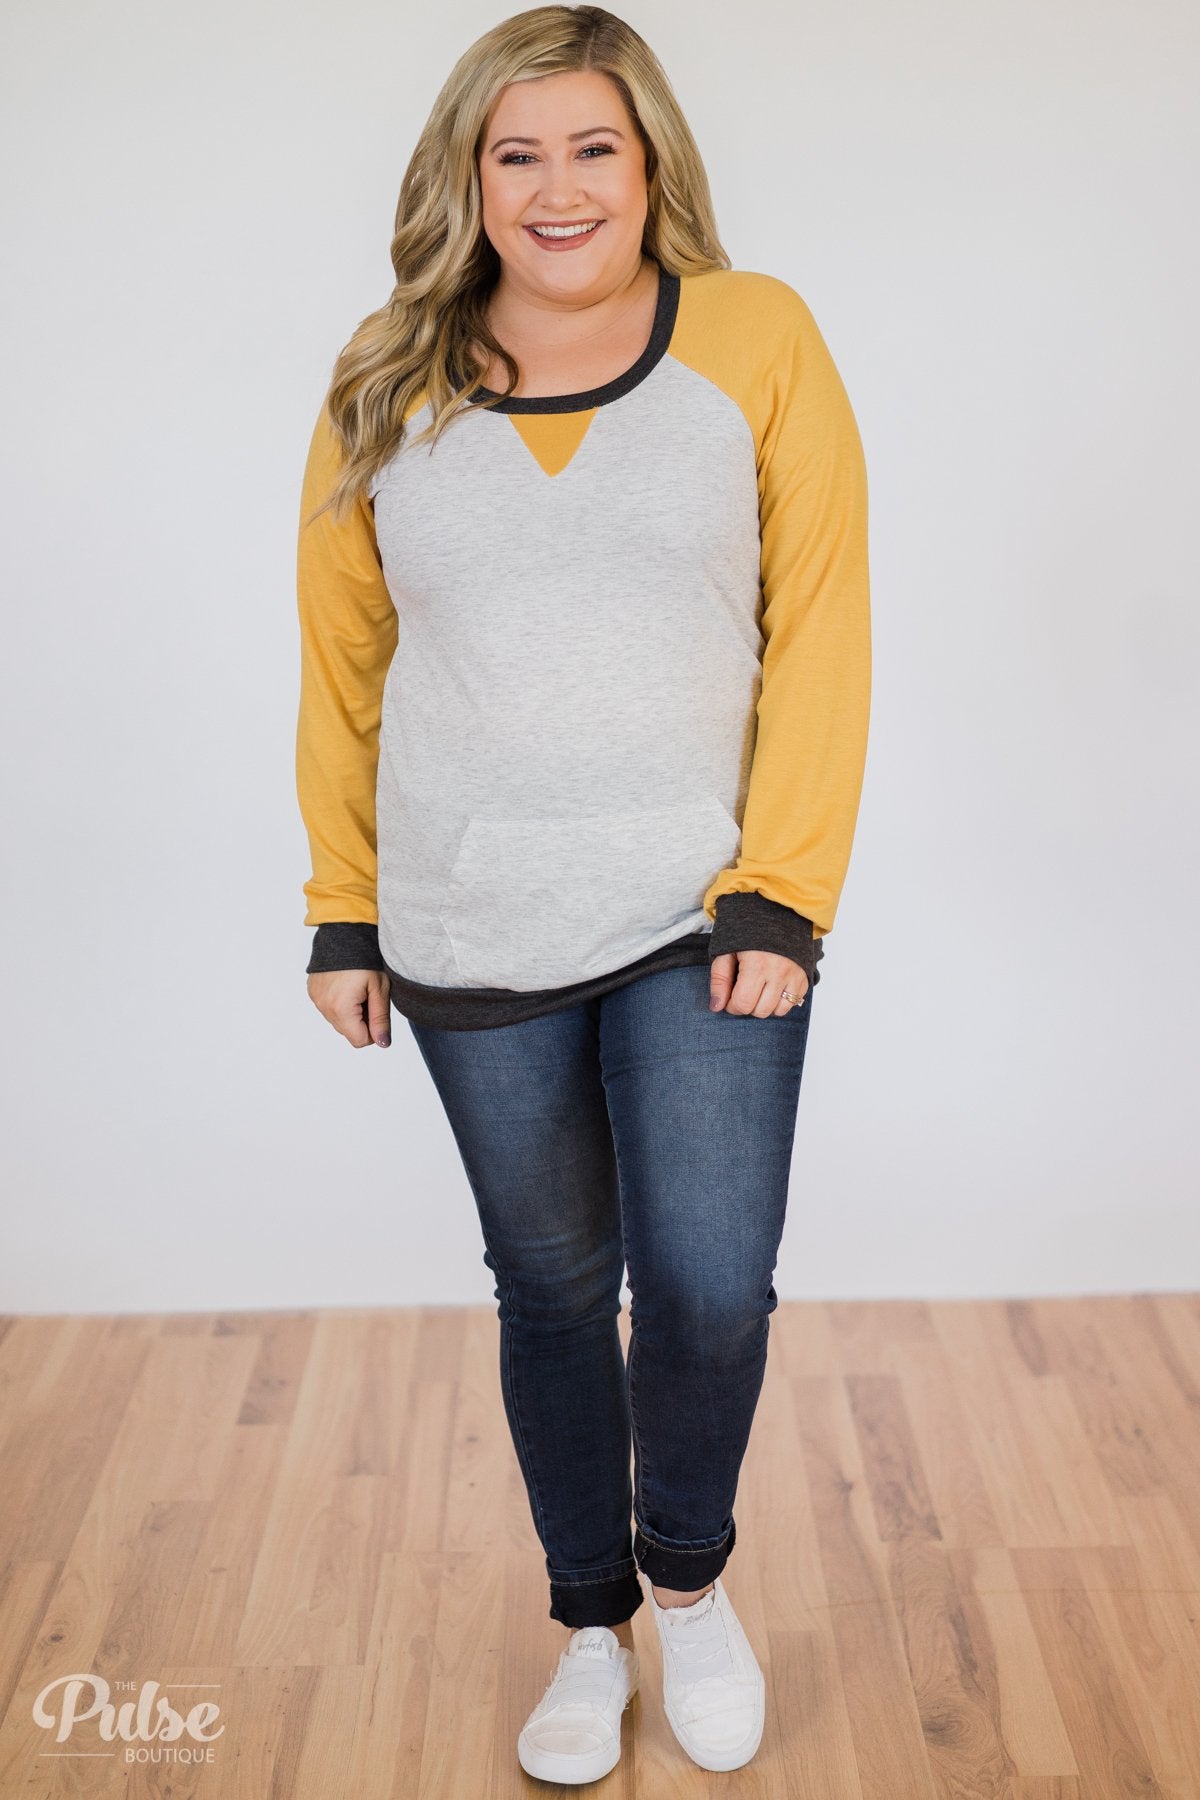 Elbow Patch Color Block Pullover Top- Yellow, Charcoal, Grey